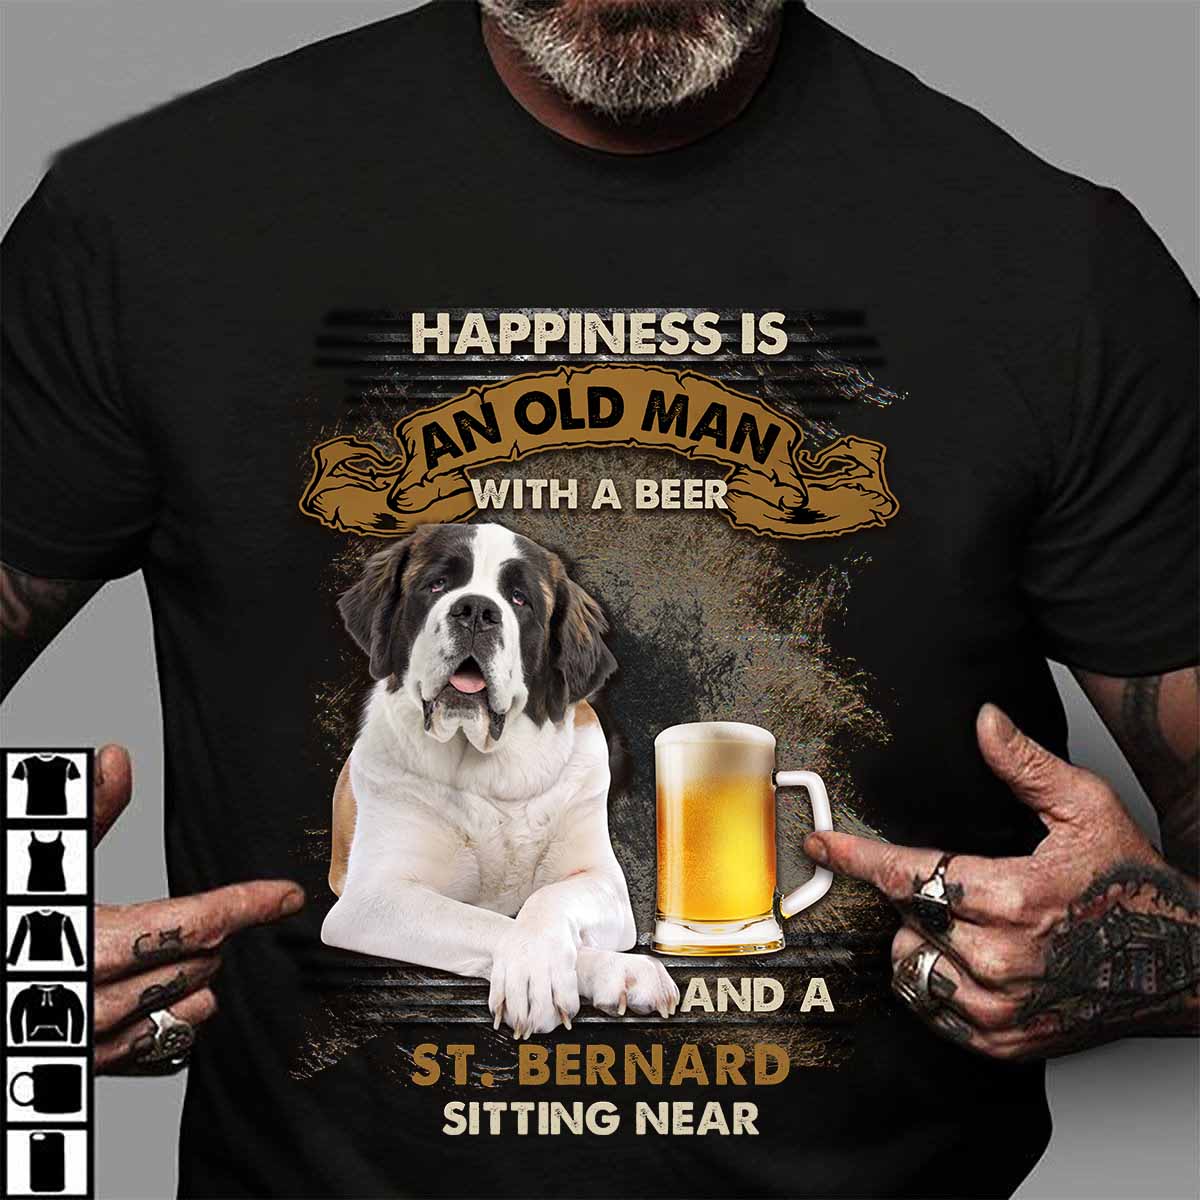 Happiness is an old man with a St. Bernard and a wolf sitting near - Beer lover